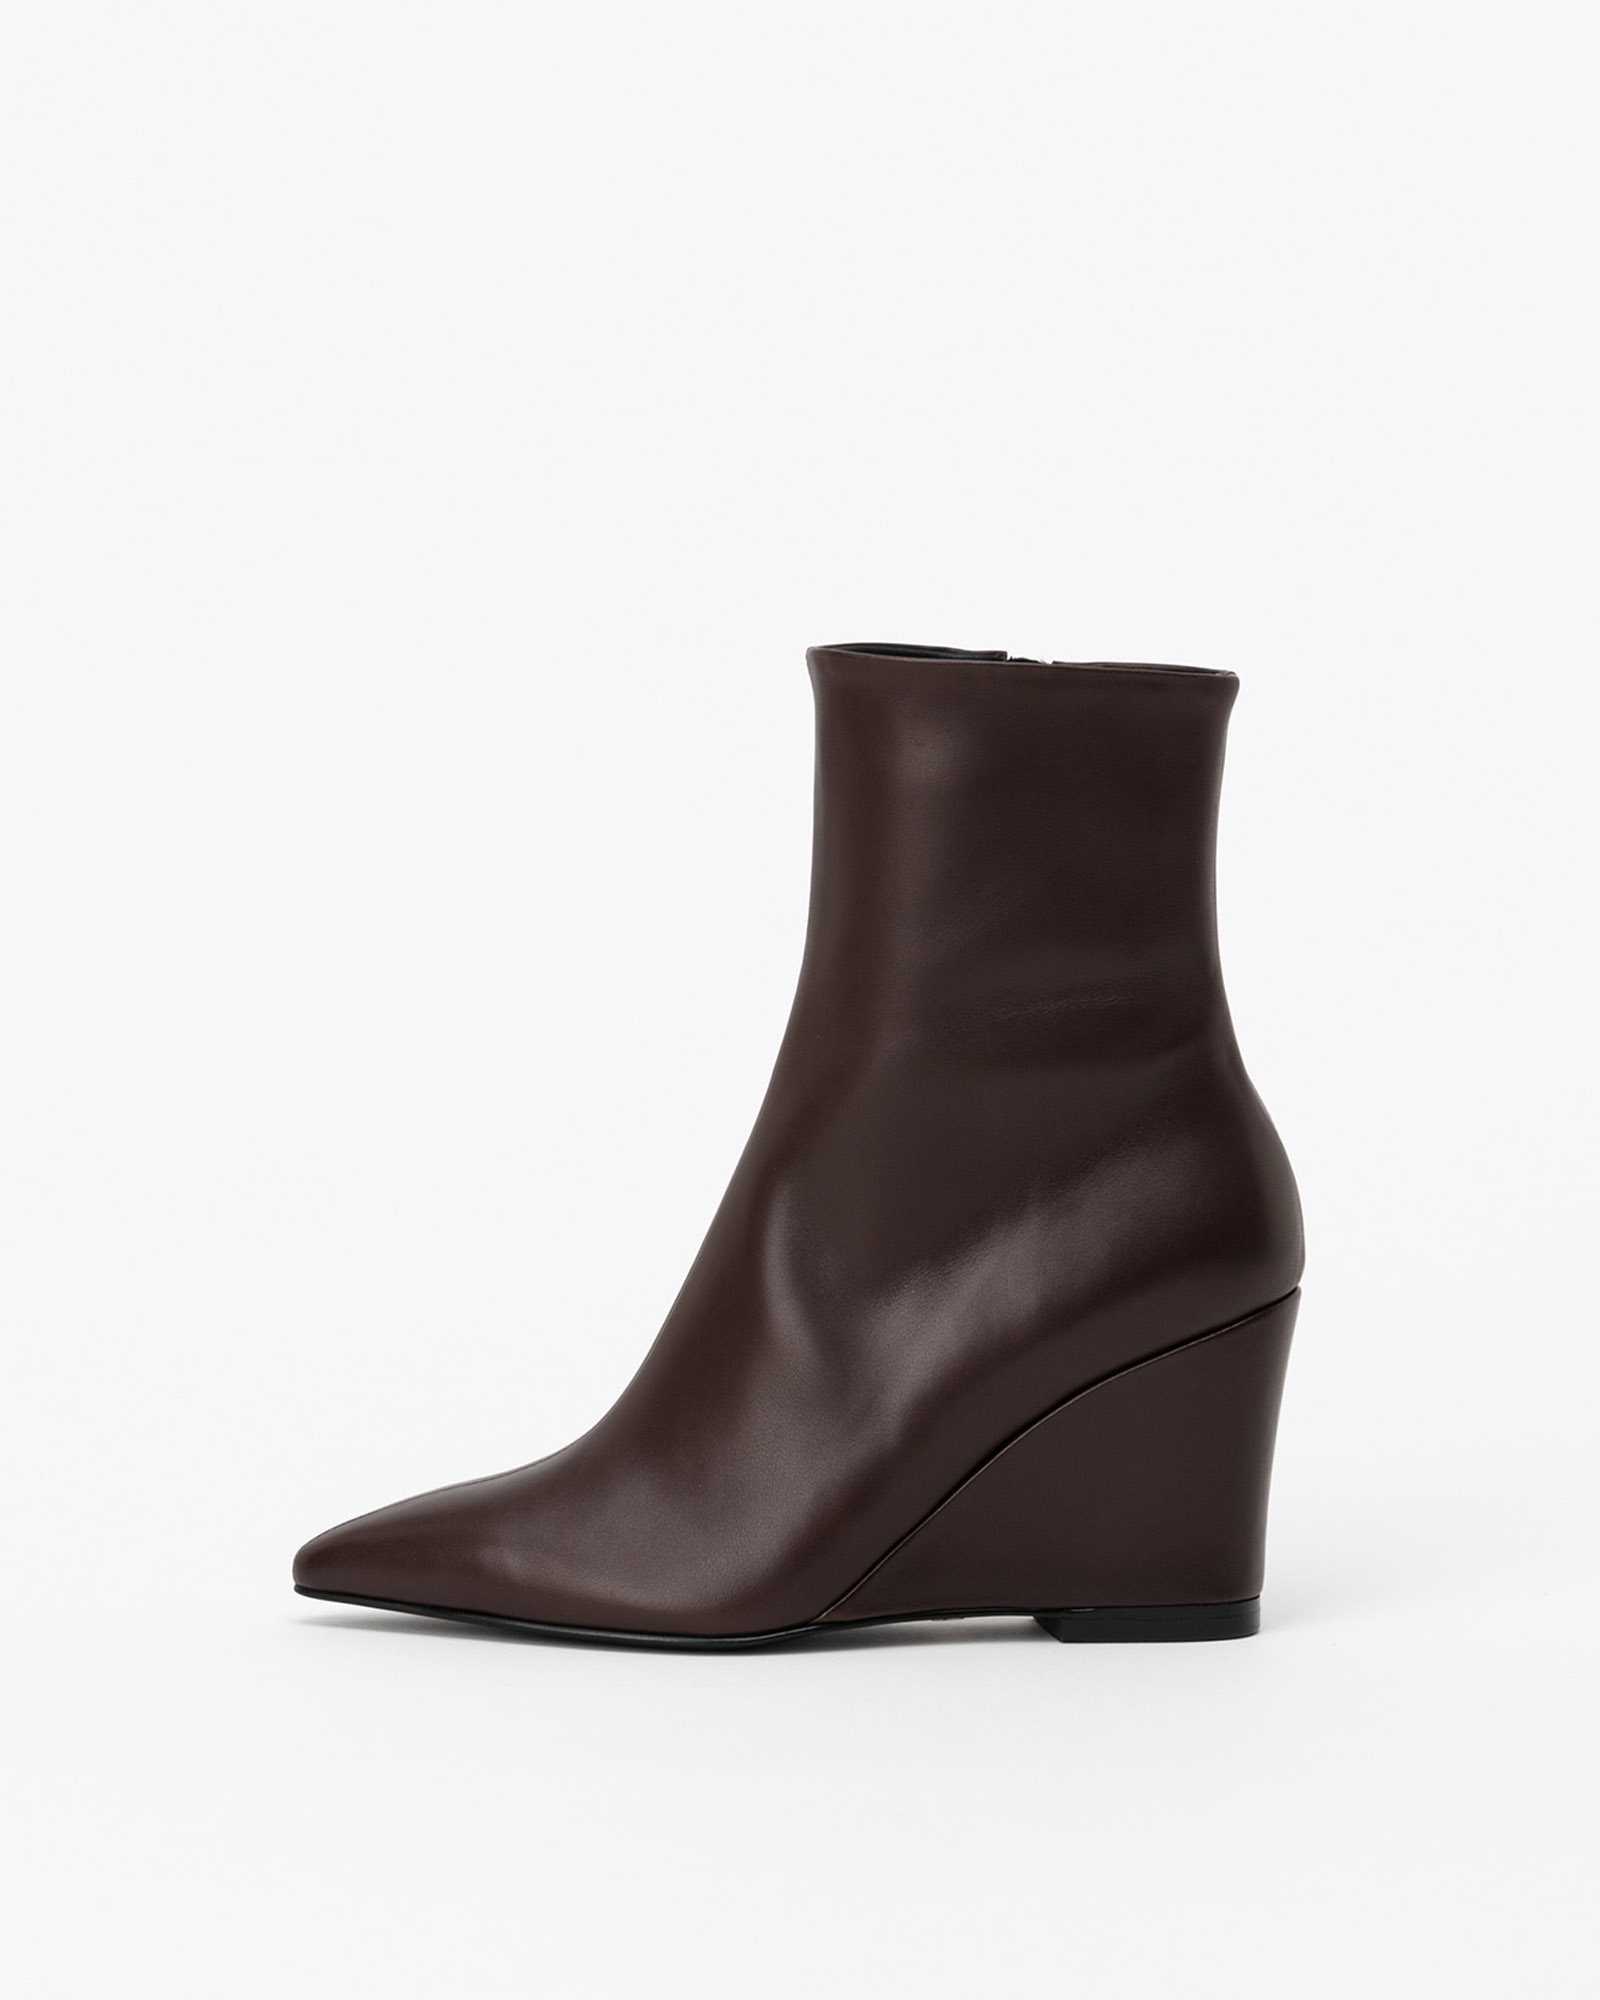 Flauto Wedge Boots in Roast Brown